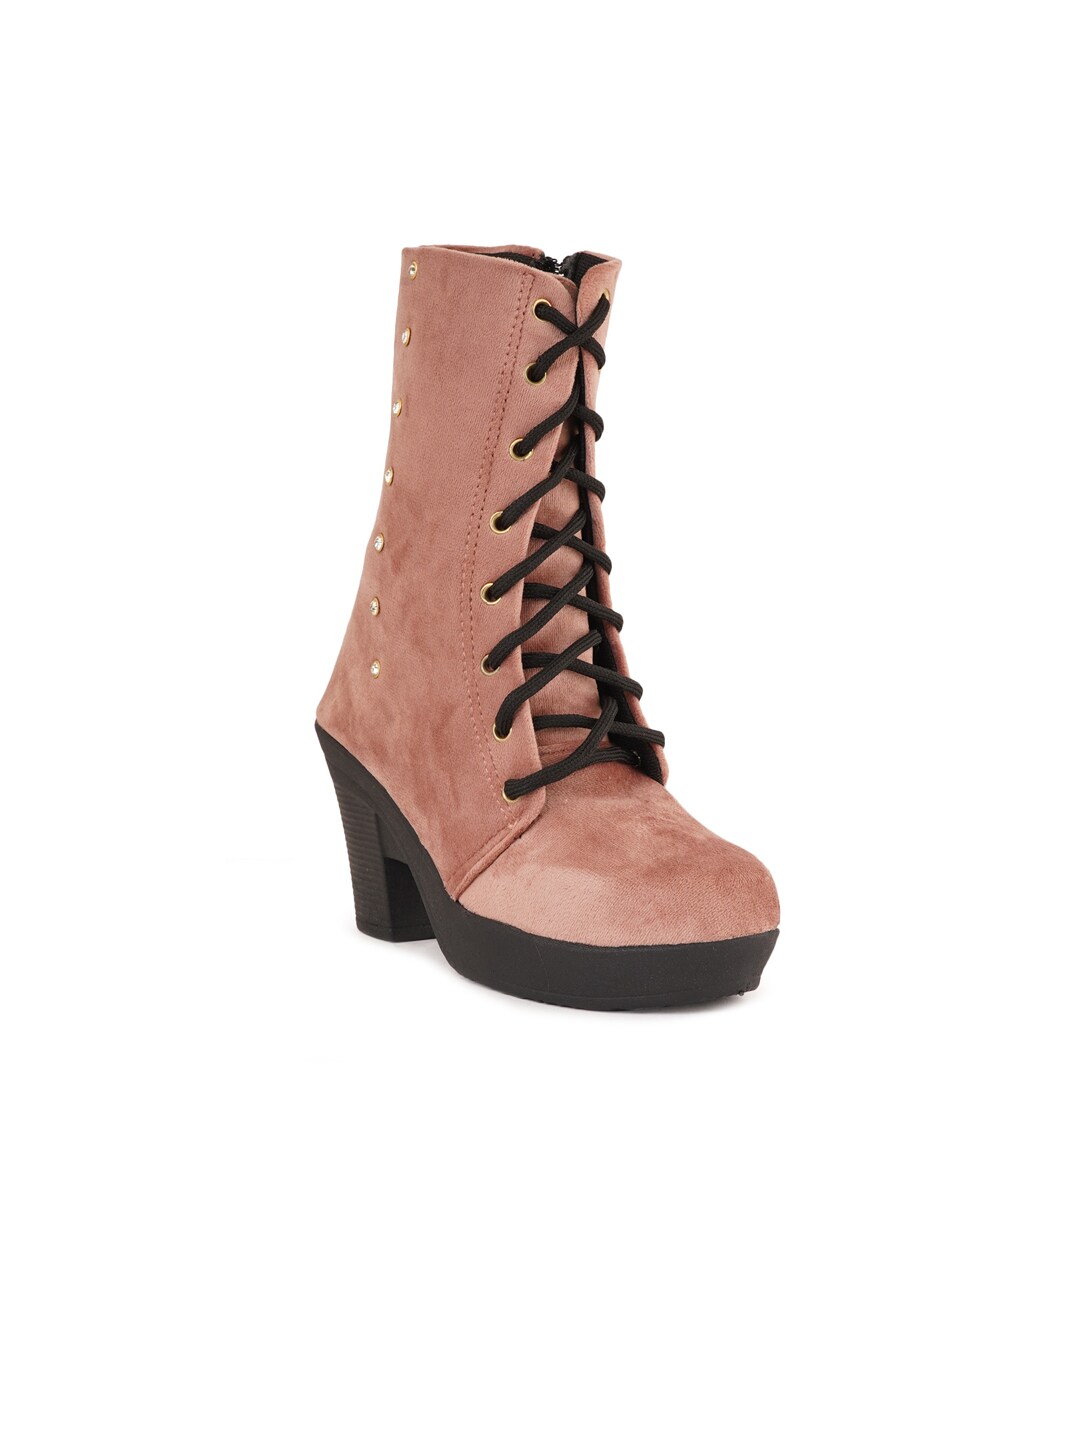 SAPATOS Women Peach-Coloured Suede Flat Boots Price in India